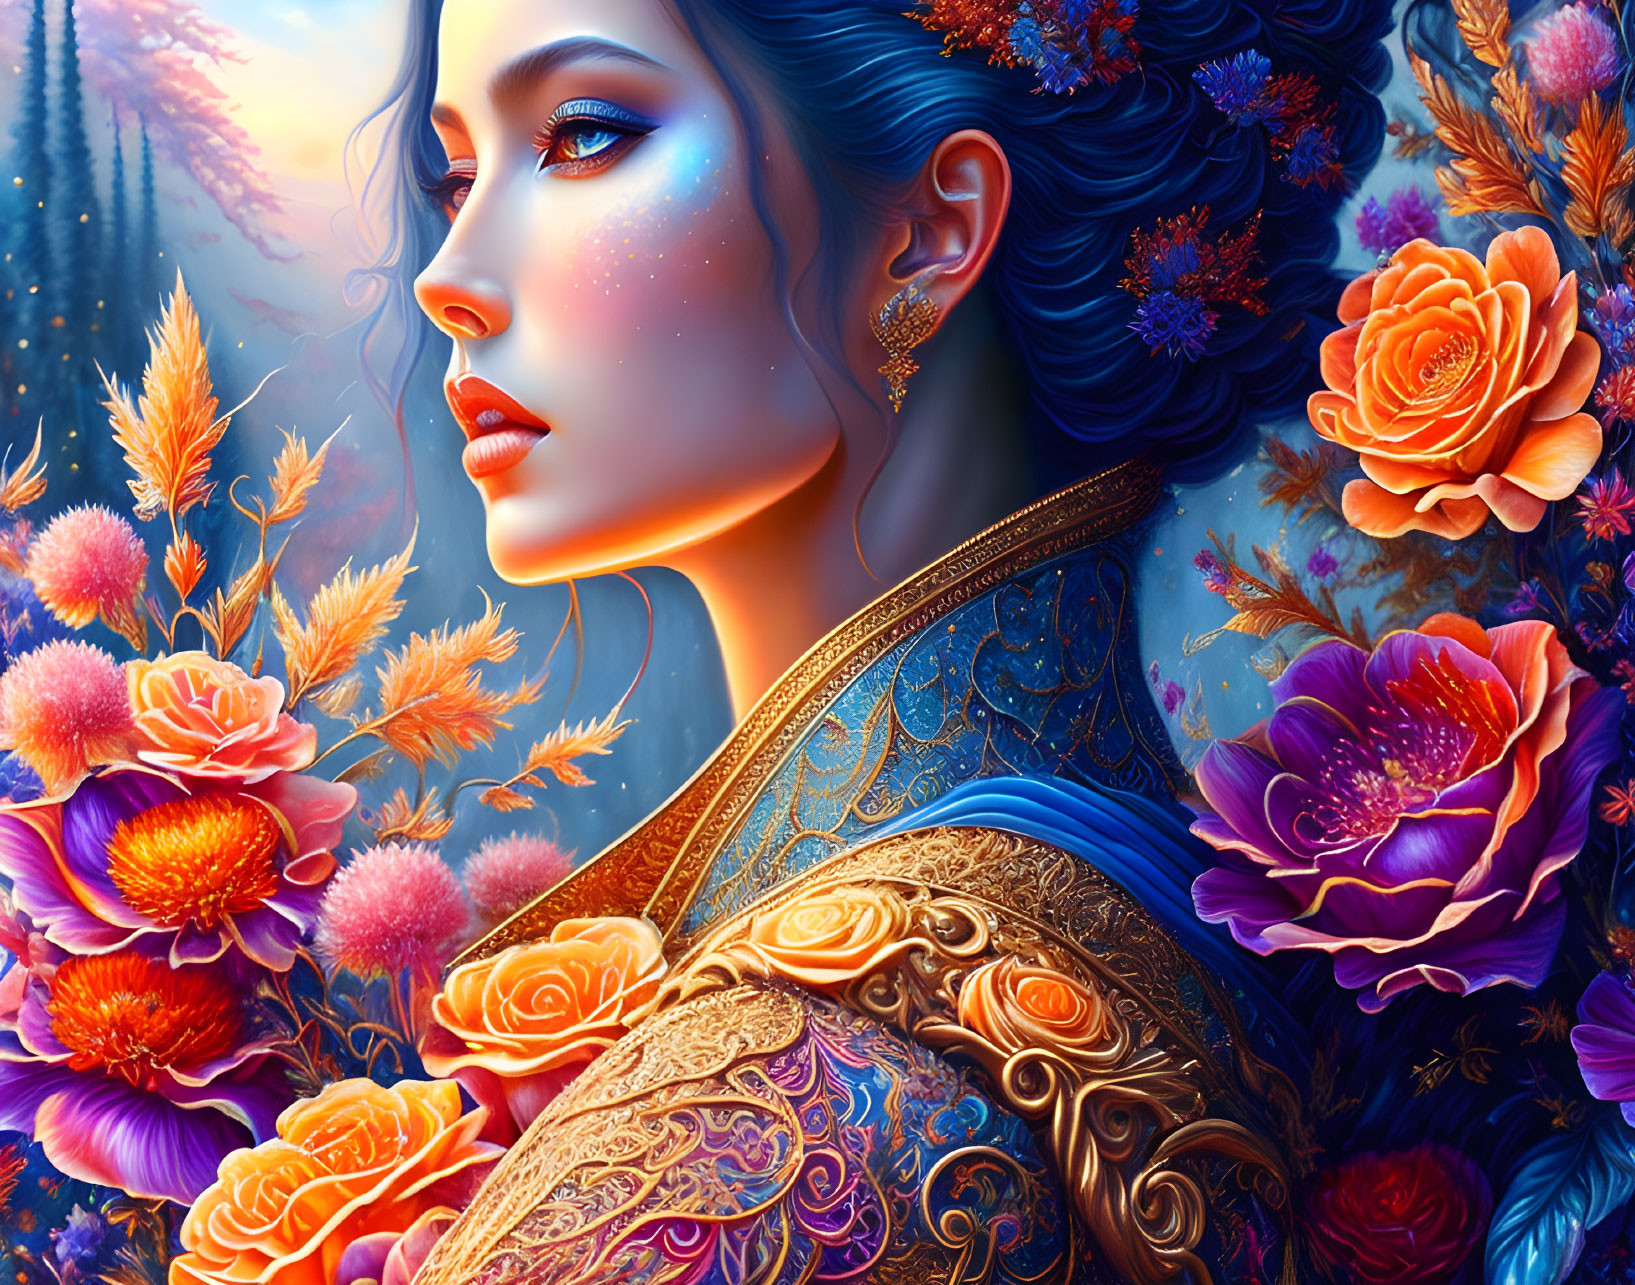 Vivid digital art: Woman with blue skin in ornate golden attire, surrounded by flowers